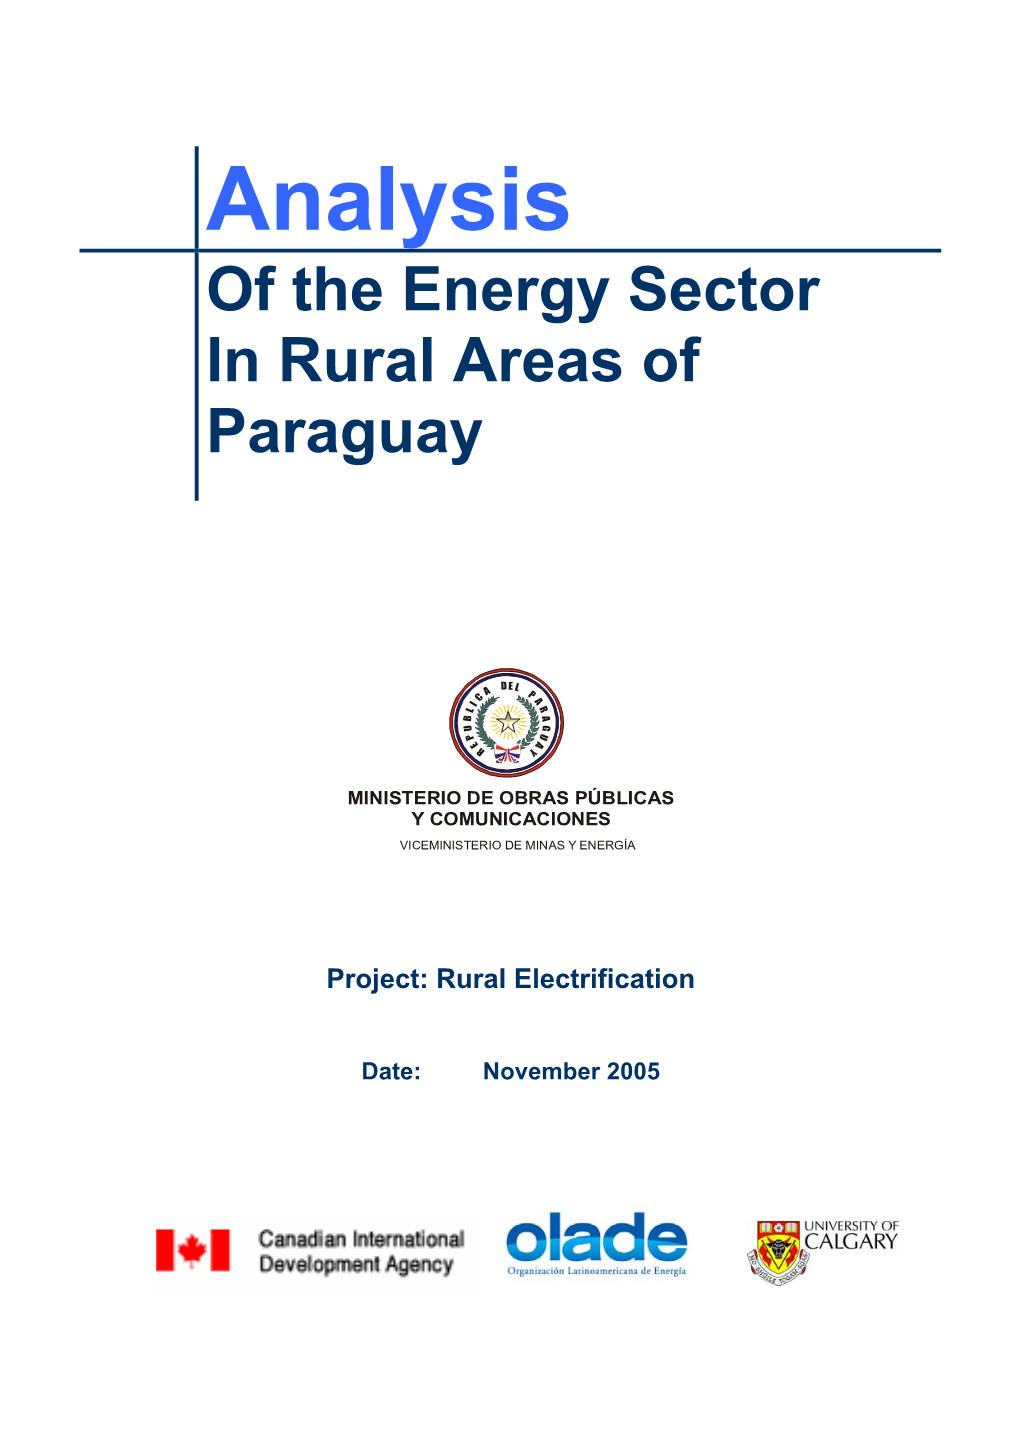 Analysis of the Energy Sector in Rural Areas of Paraguay